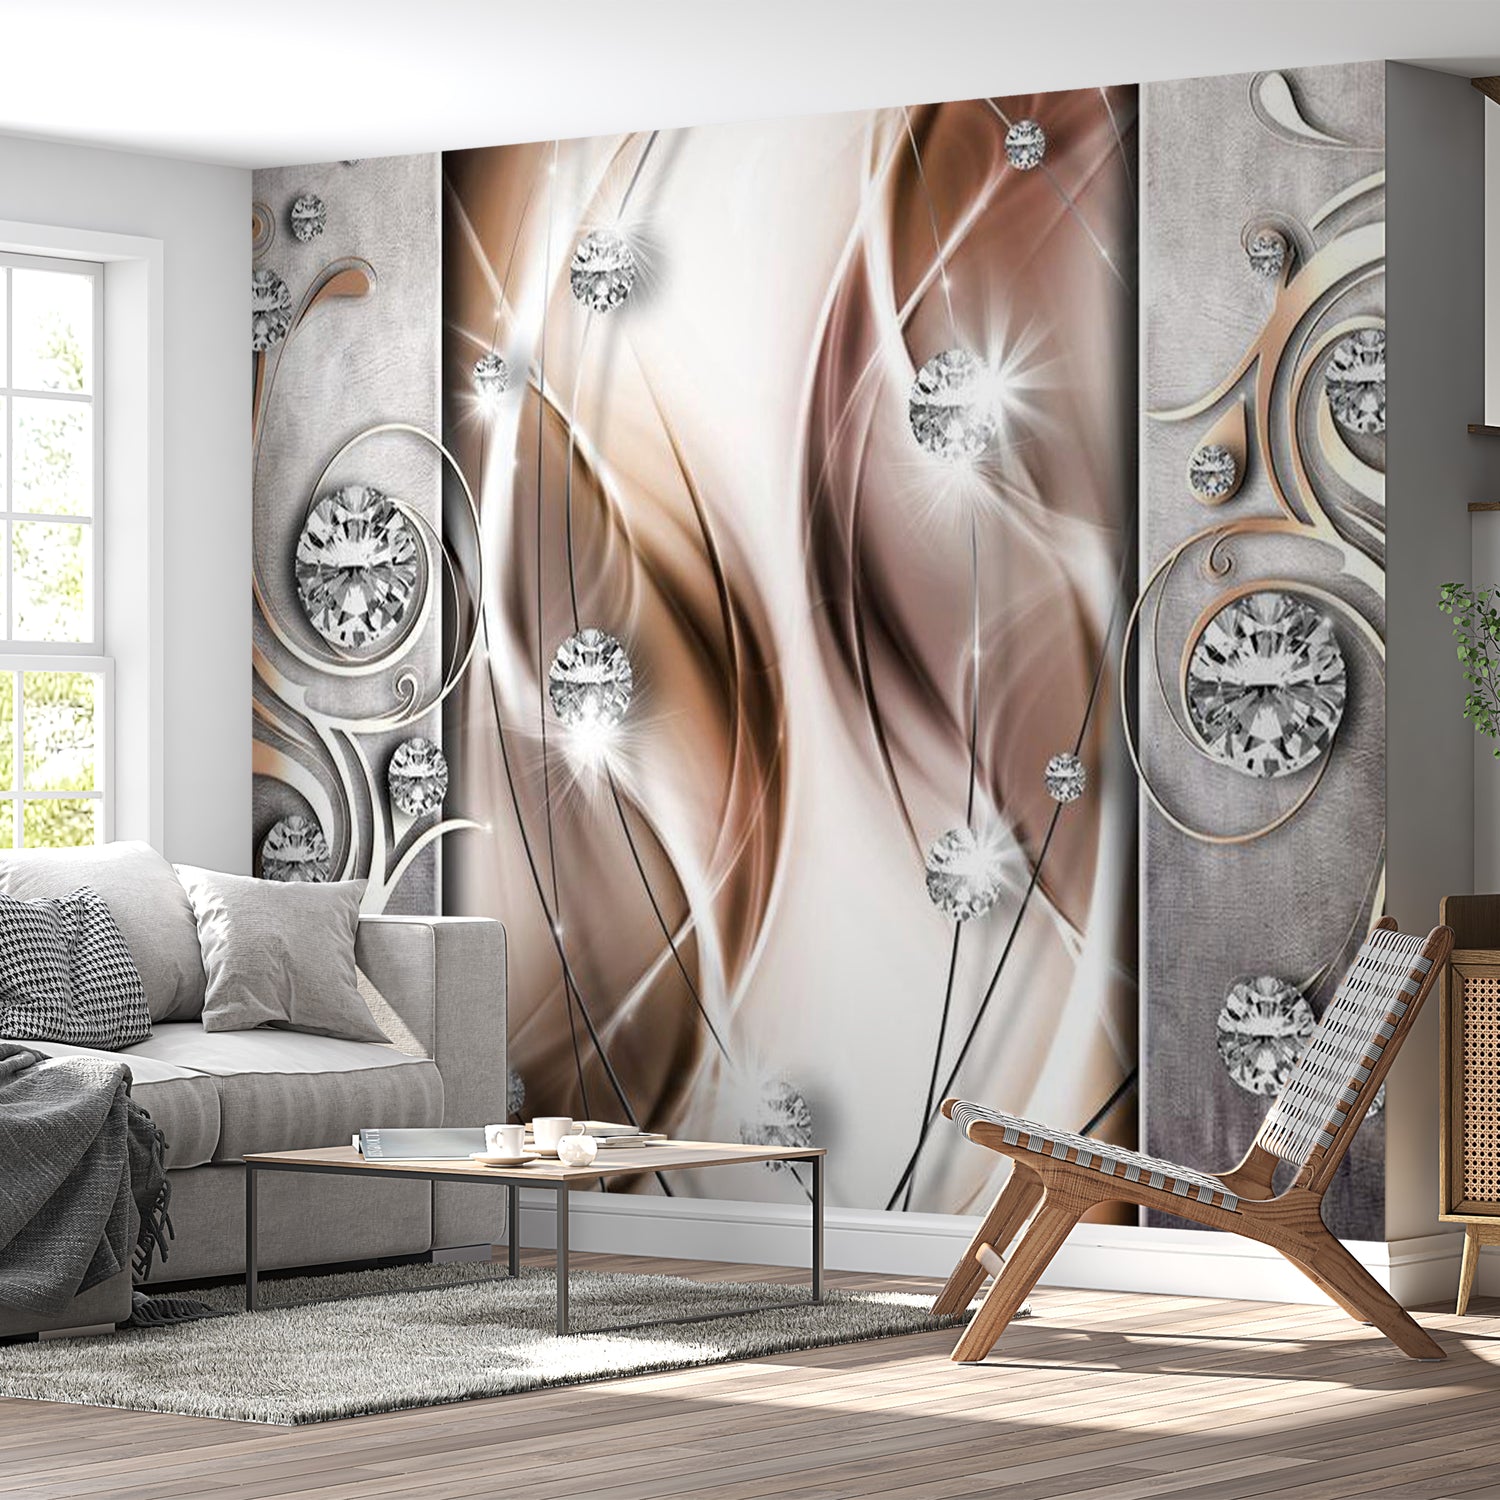 Peel & Stick Glam Wall Mural - Brown And Diamonds - Removable Wall Decals